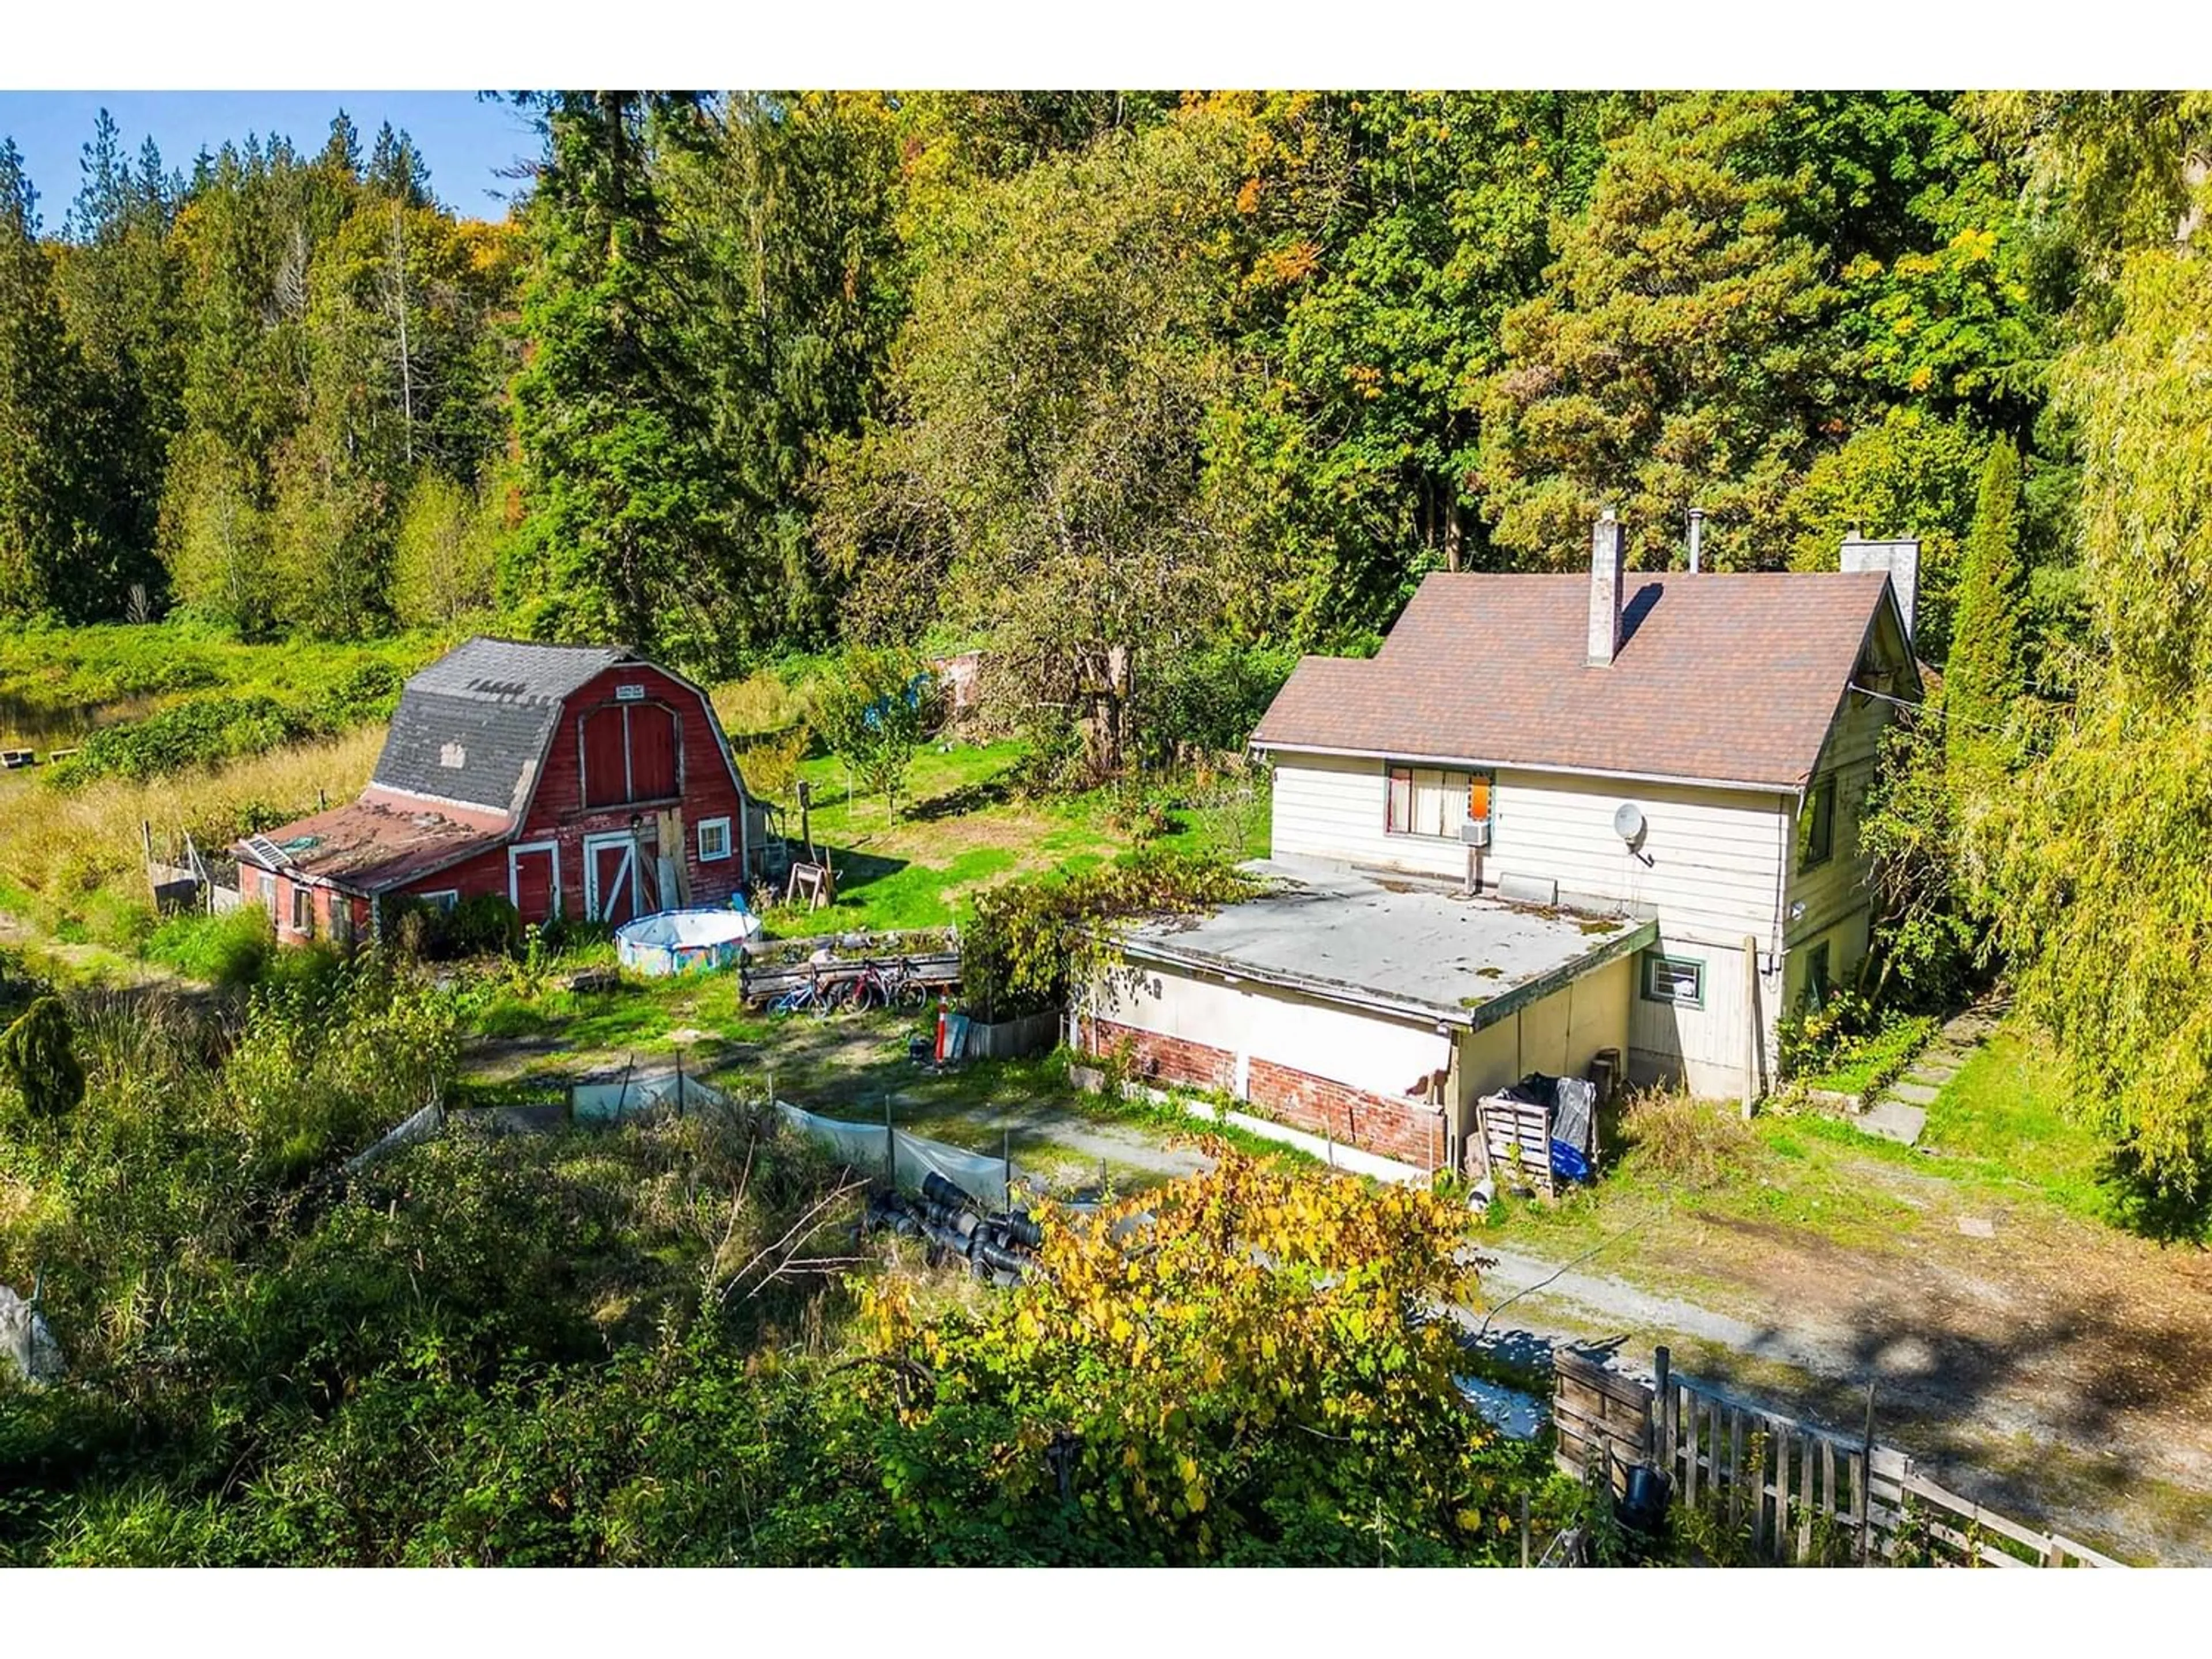 Forest view for 9019 187 STREET, Surrey British Columbia V4N3N5